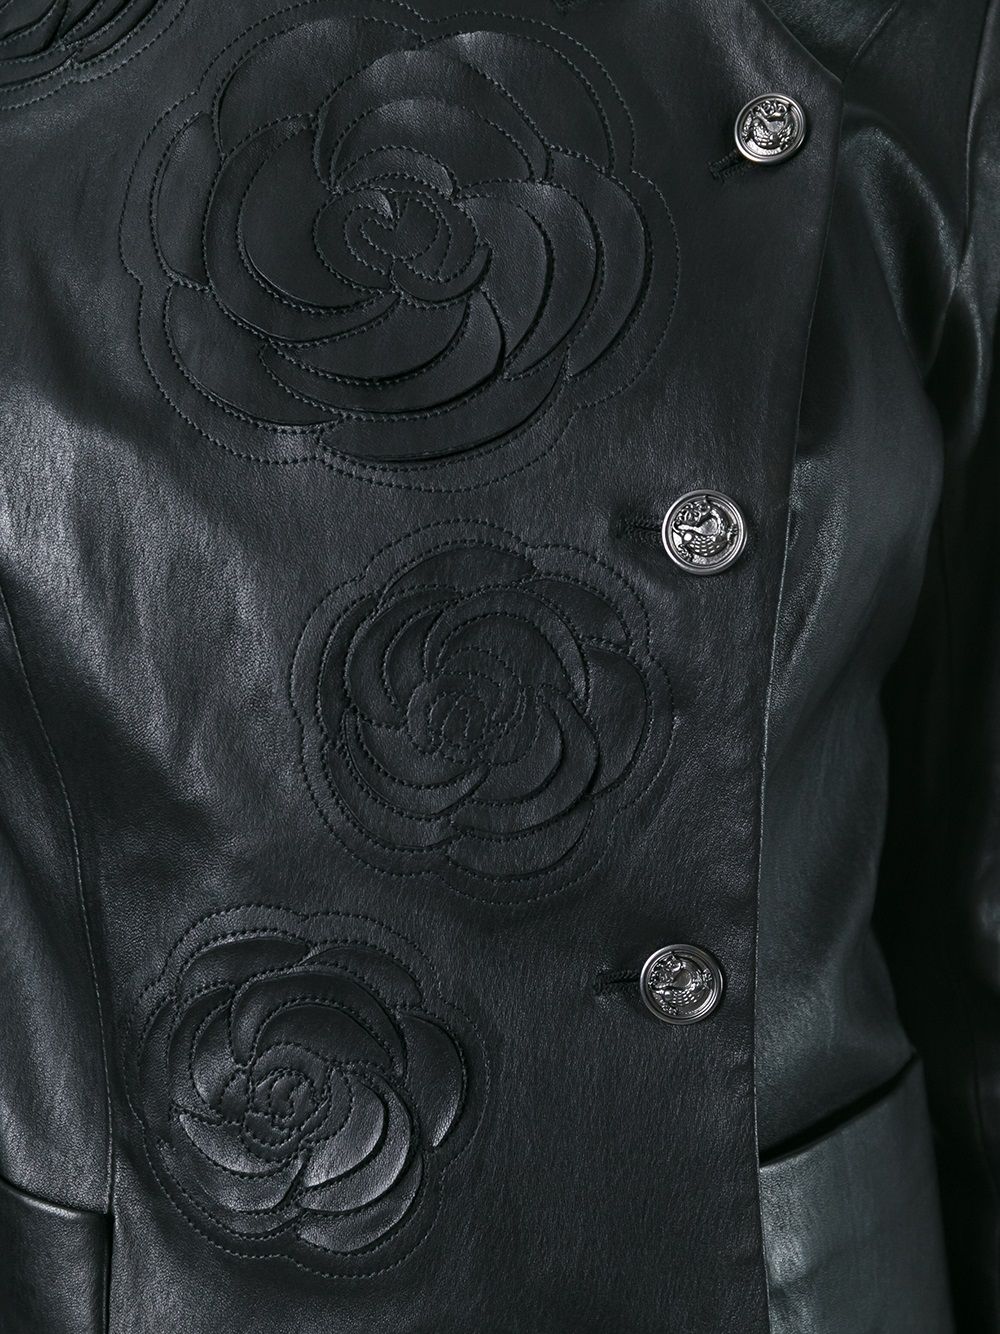 CHANEL Pre-Owned Camellia Flower Embroidered Jacket - Farfetch